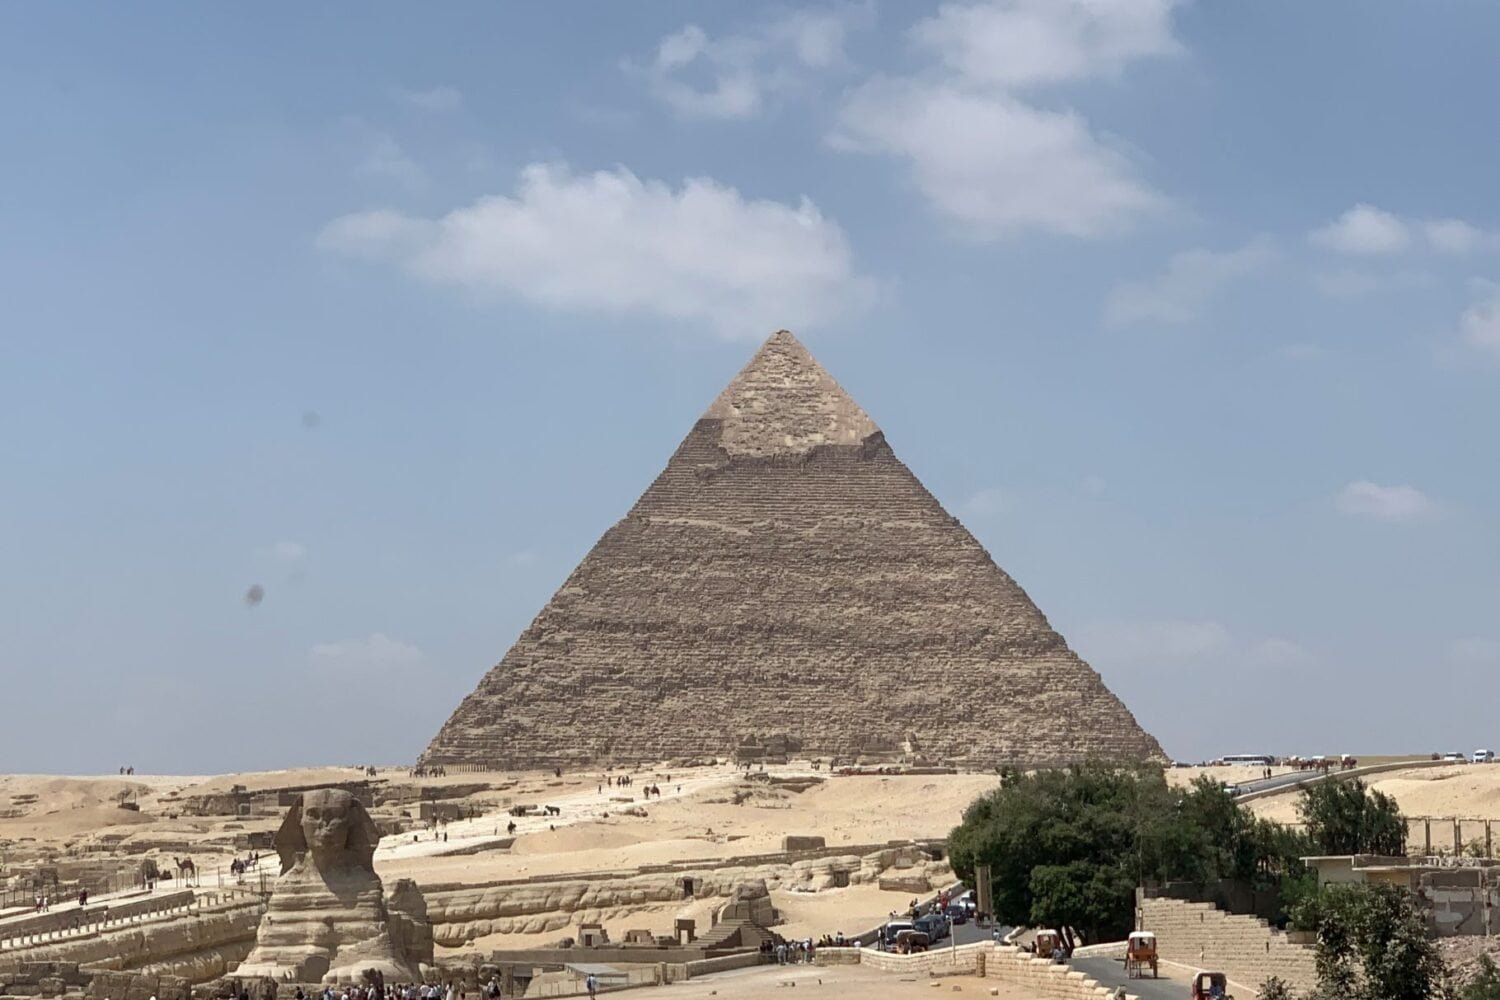 Pyramids & Red Sea Holiday In 7 Days From UK